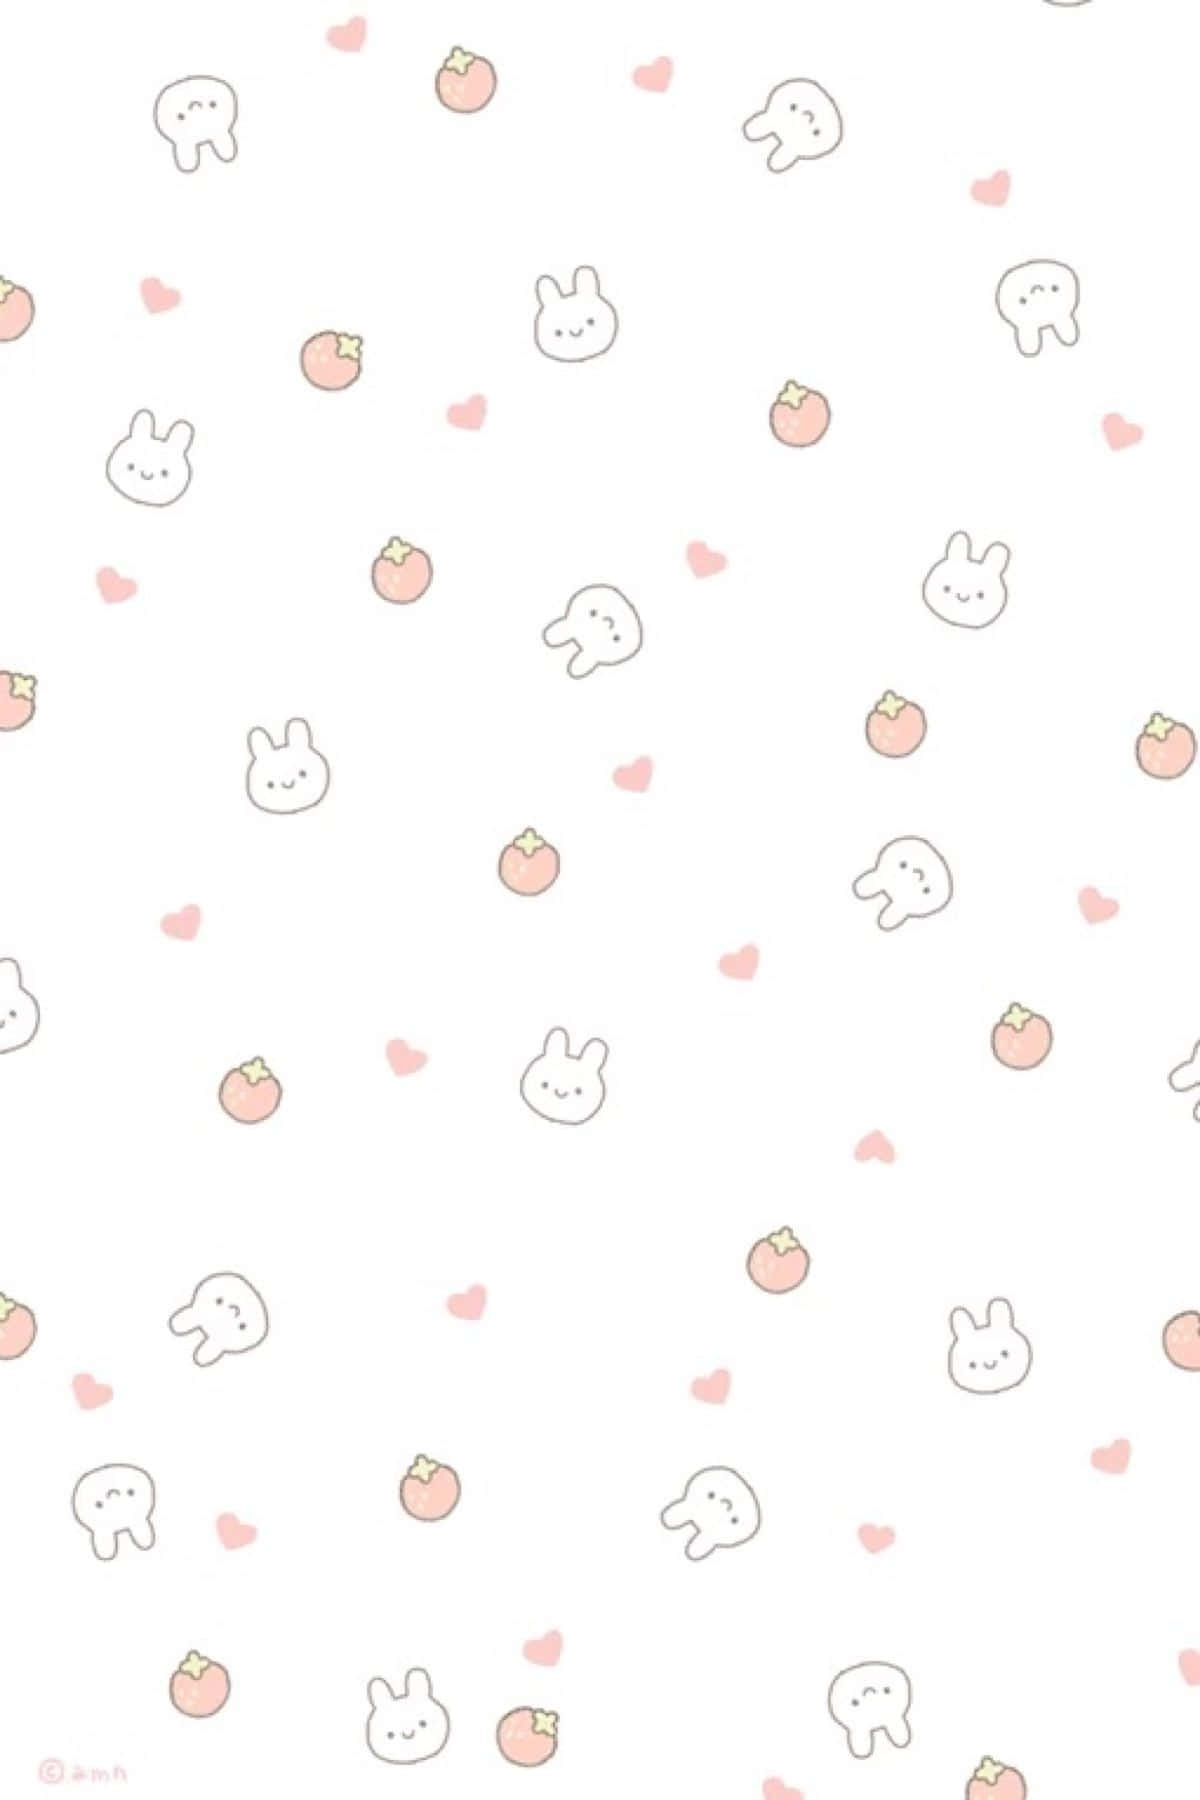 100+] Cute White Backgrounds | Wallpapers.com